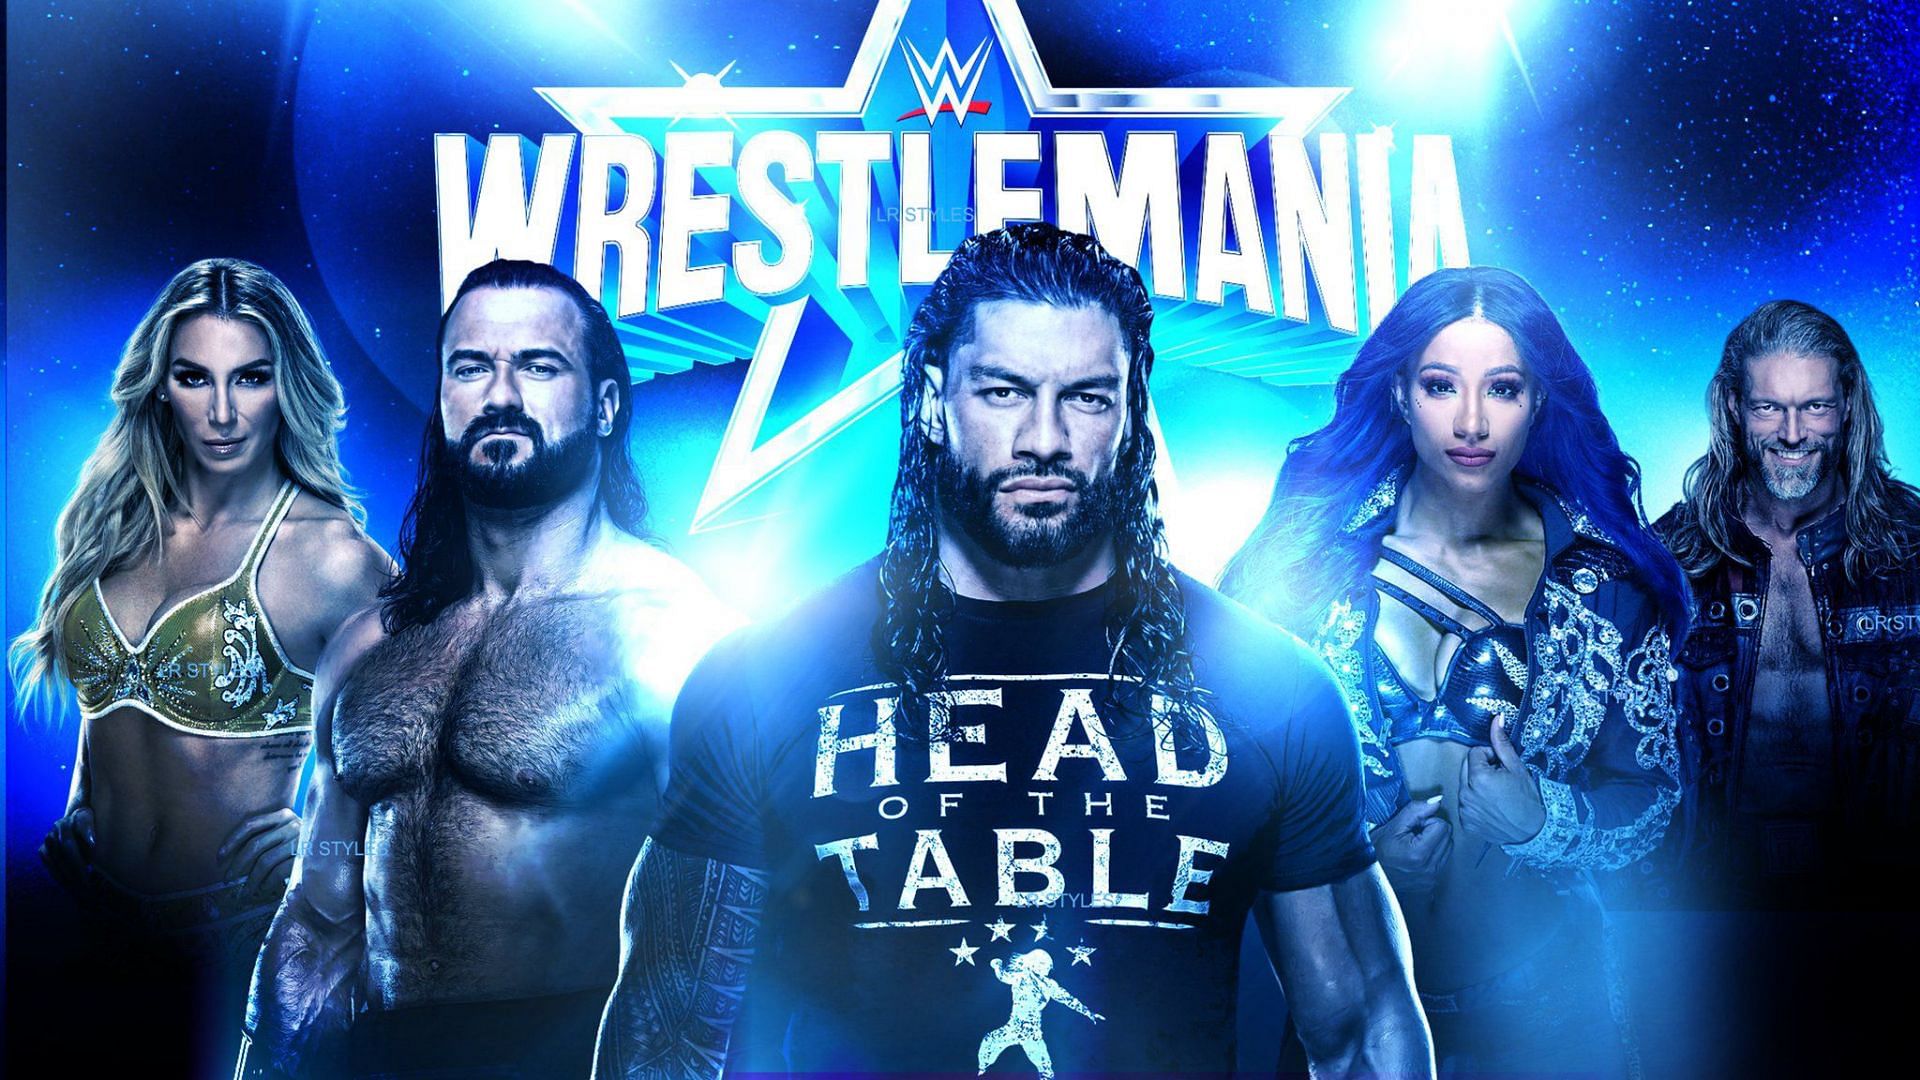 What time does WrestleMania night 1 start on Saturday?